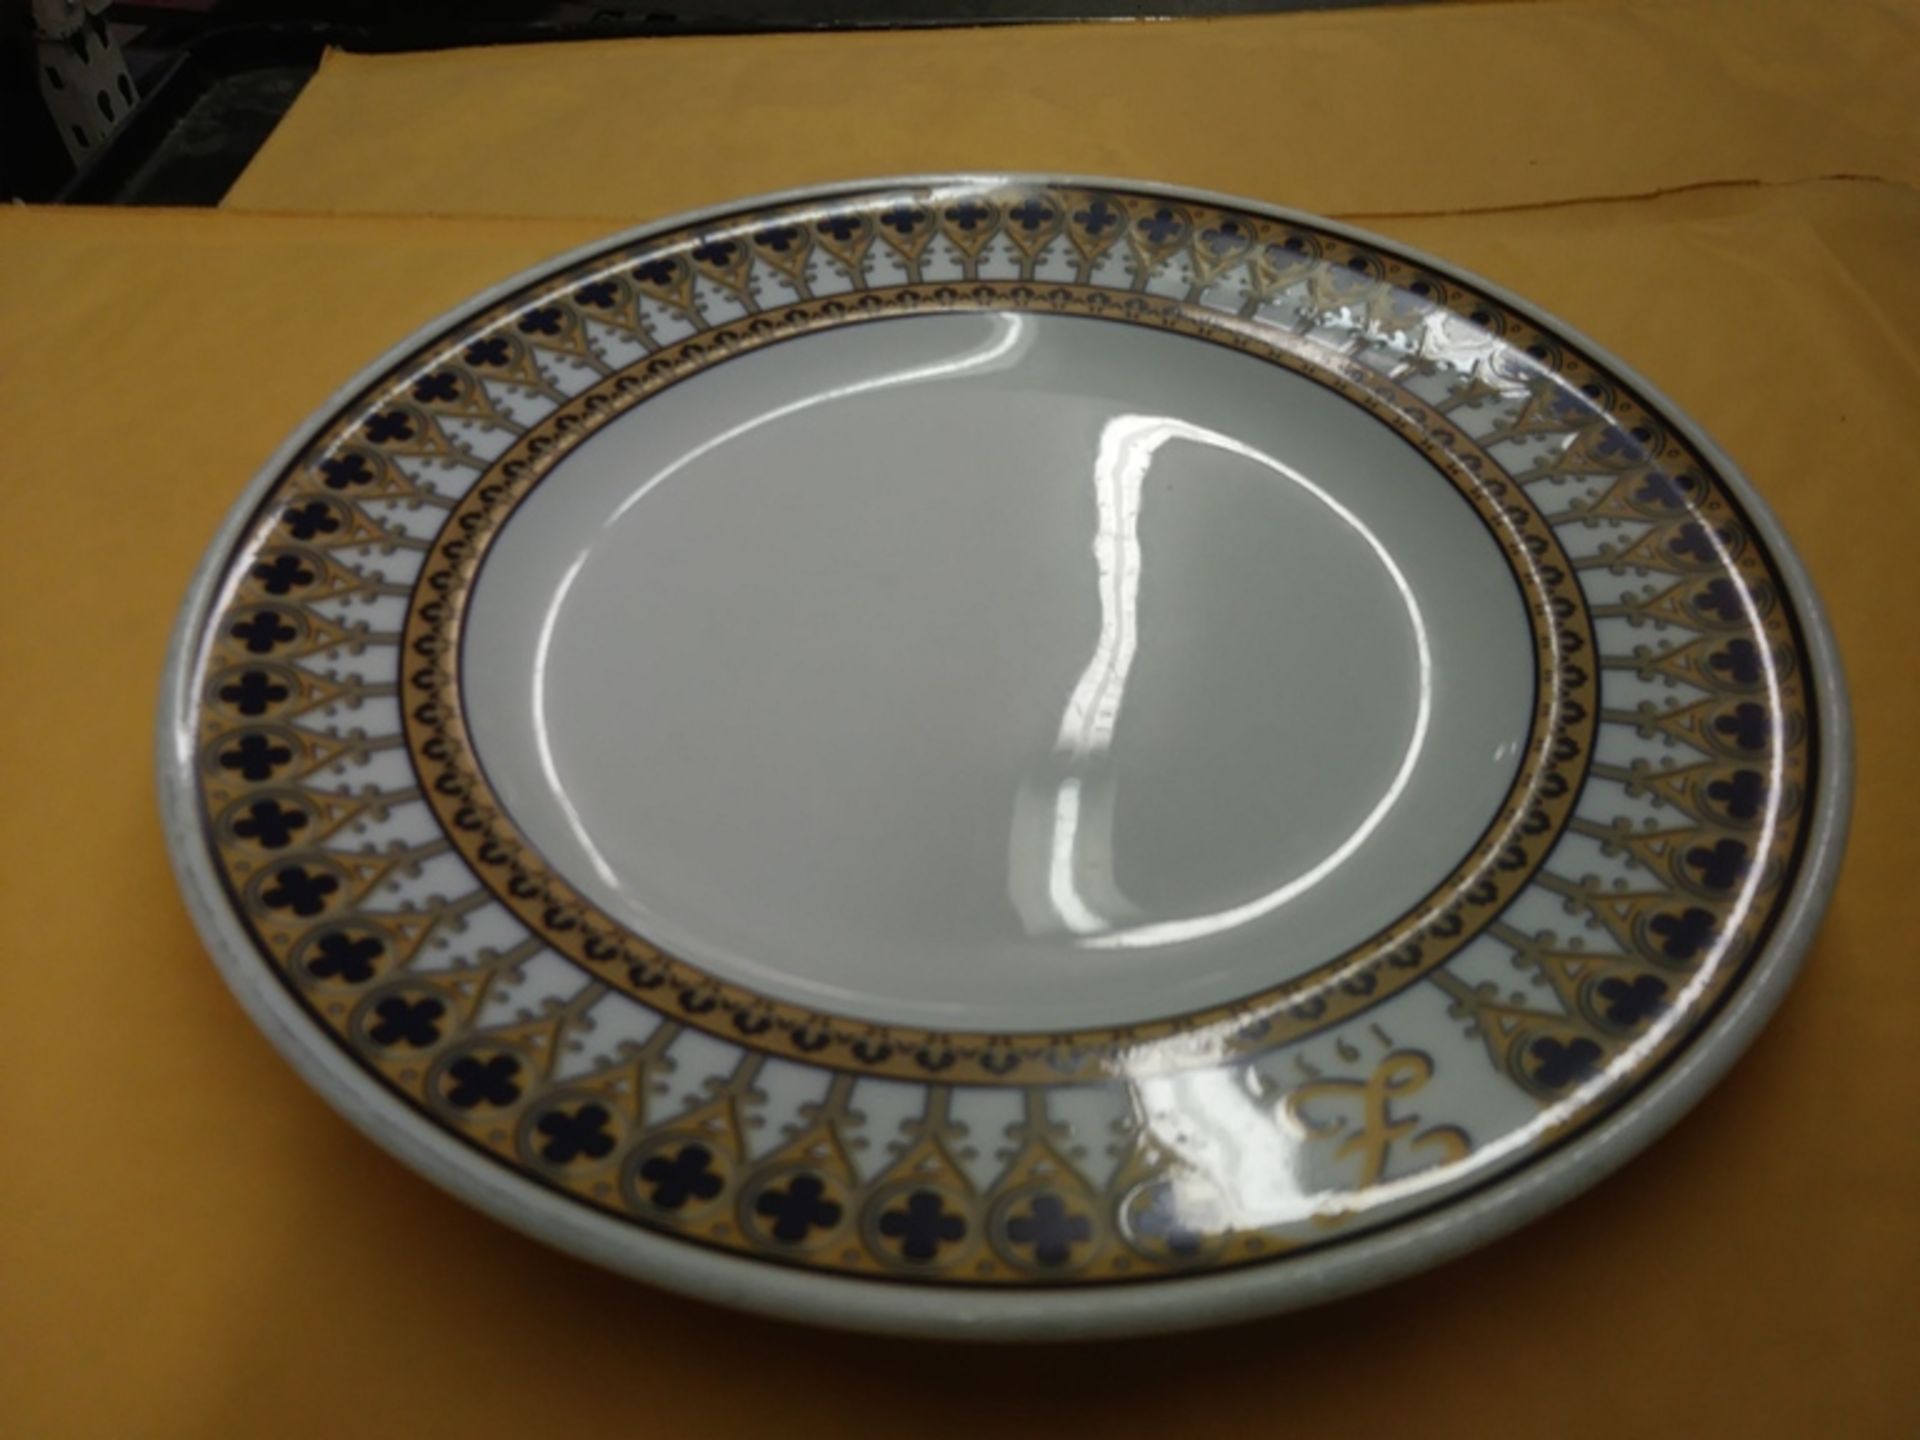 NEW 10" SCHONWALD PLATE (INCLUDES QTY: 22) - Image 2 of 3